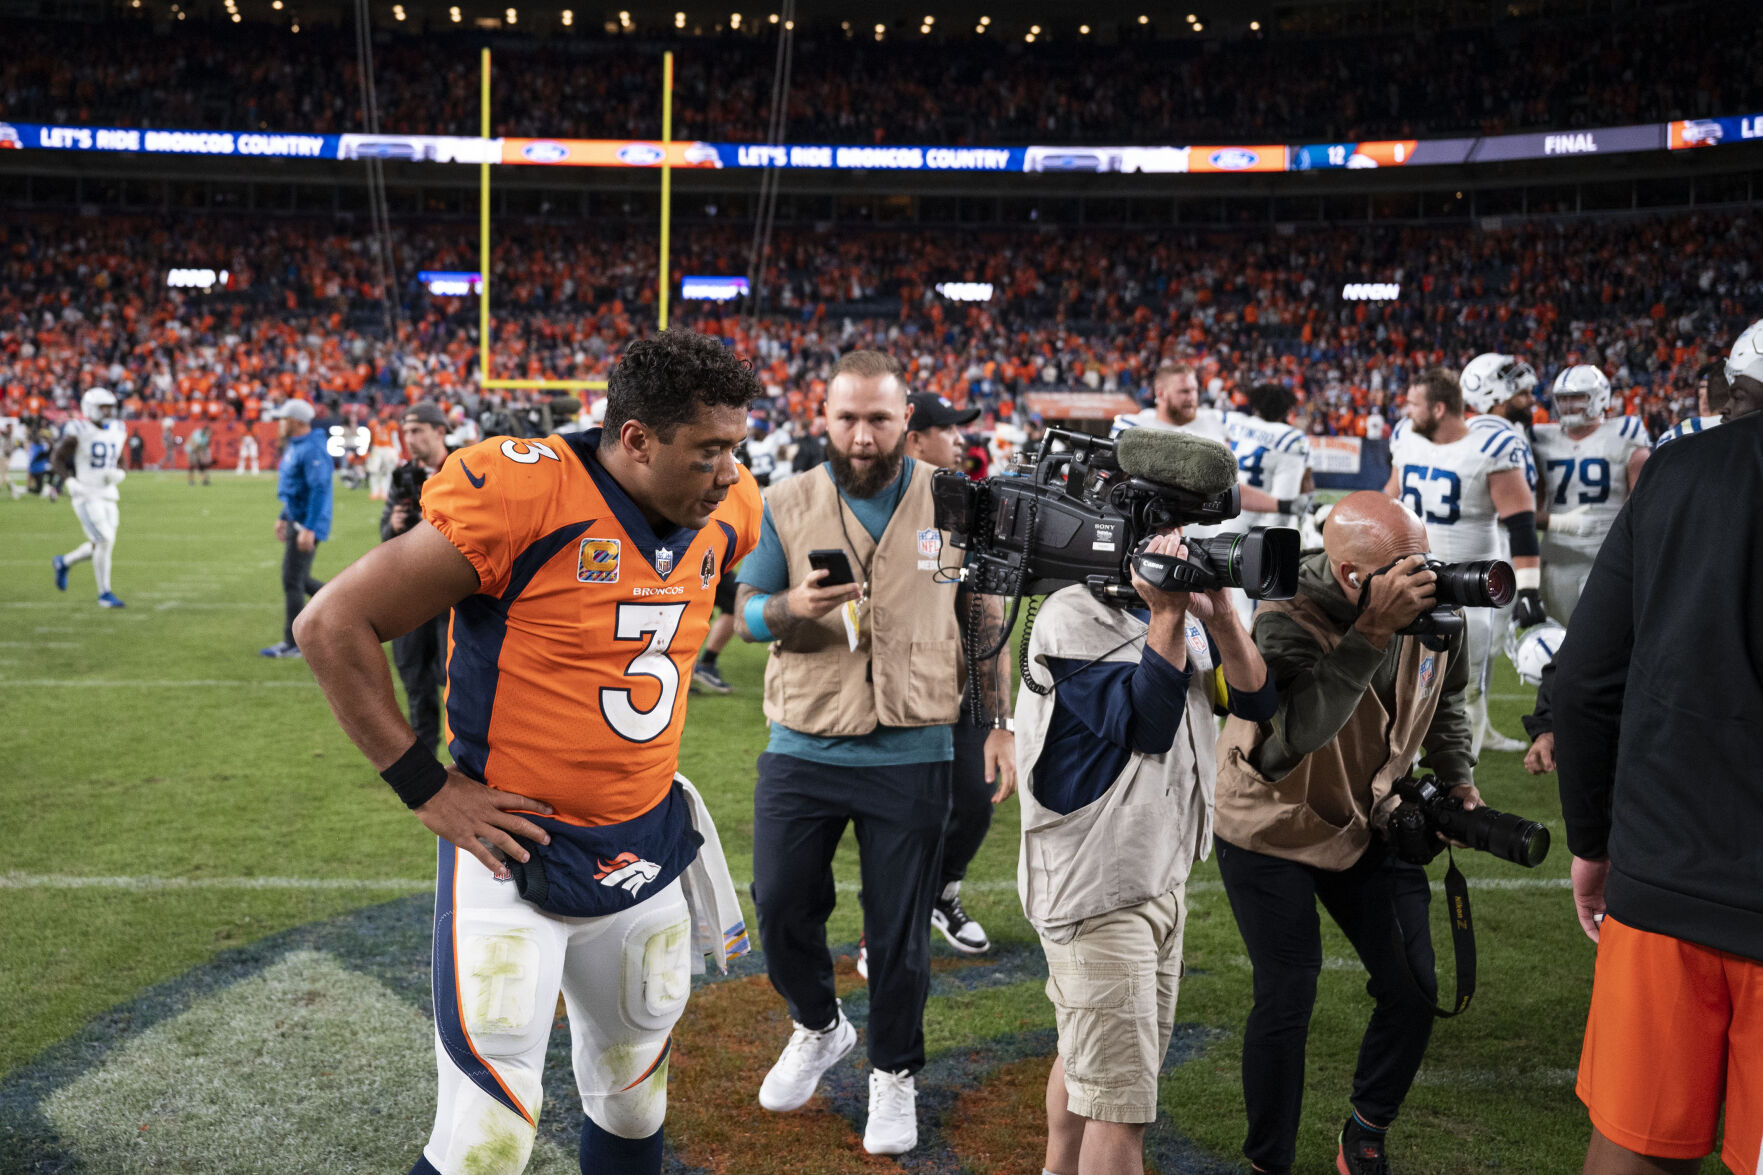 Paul Klee Sorry, America, for a Broncos team that should be flexed out of prime-time TV Paul Klee denvergazette